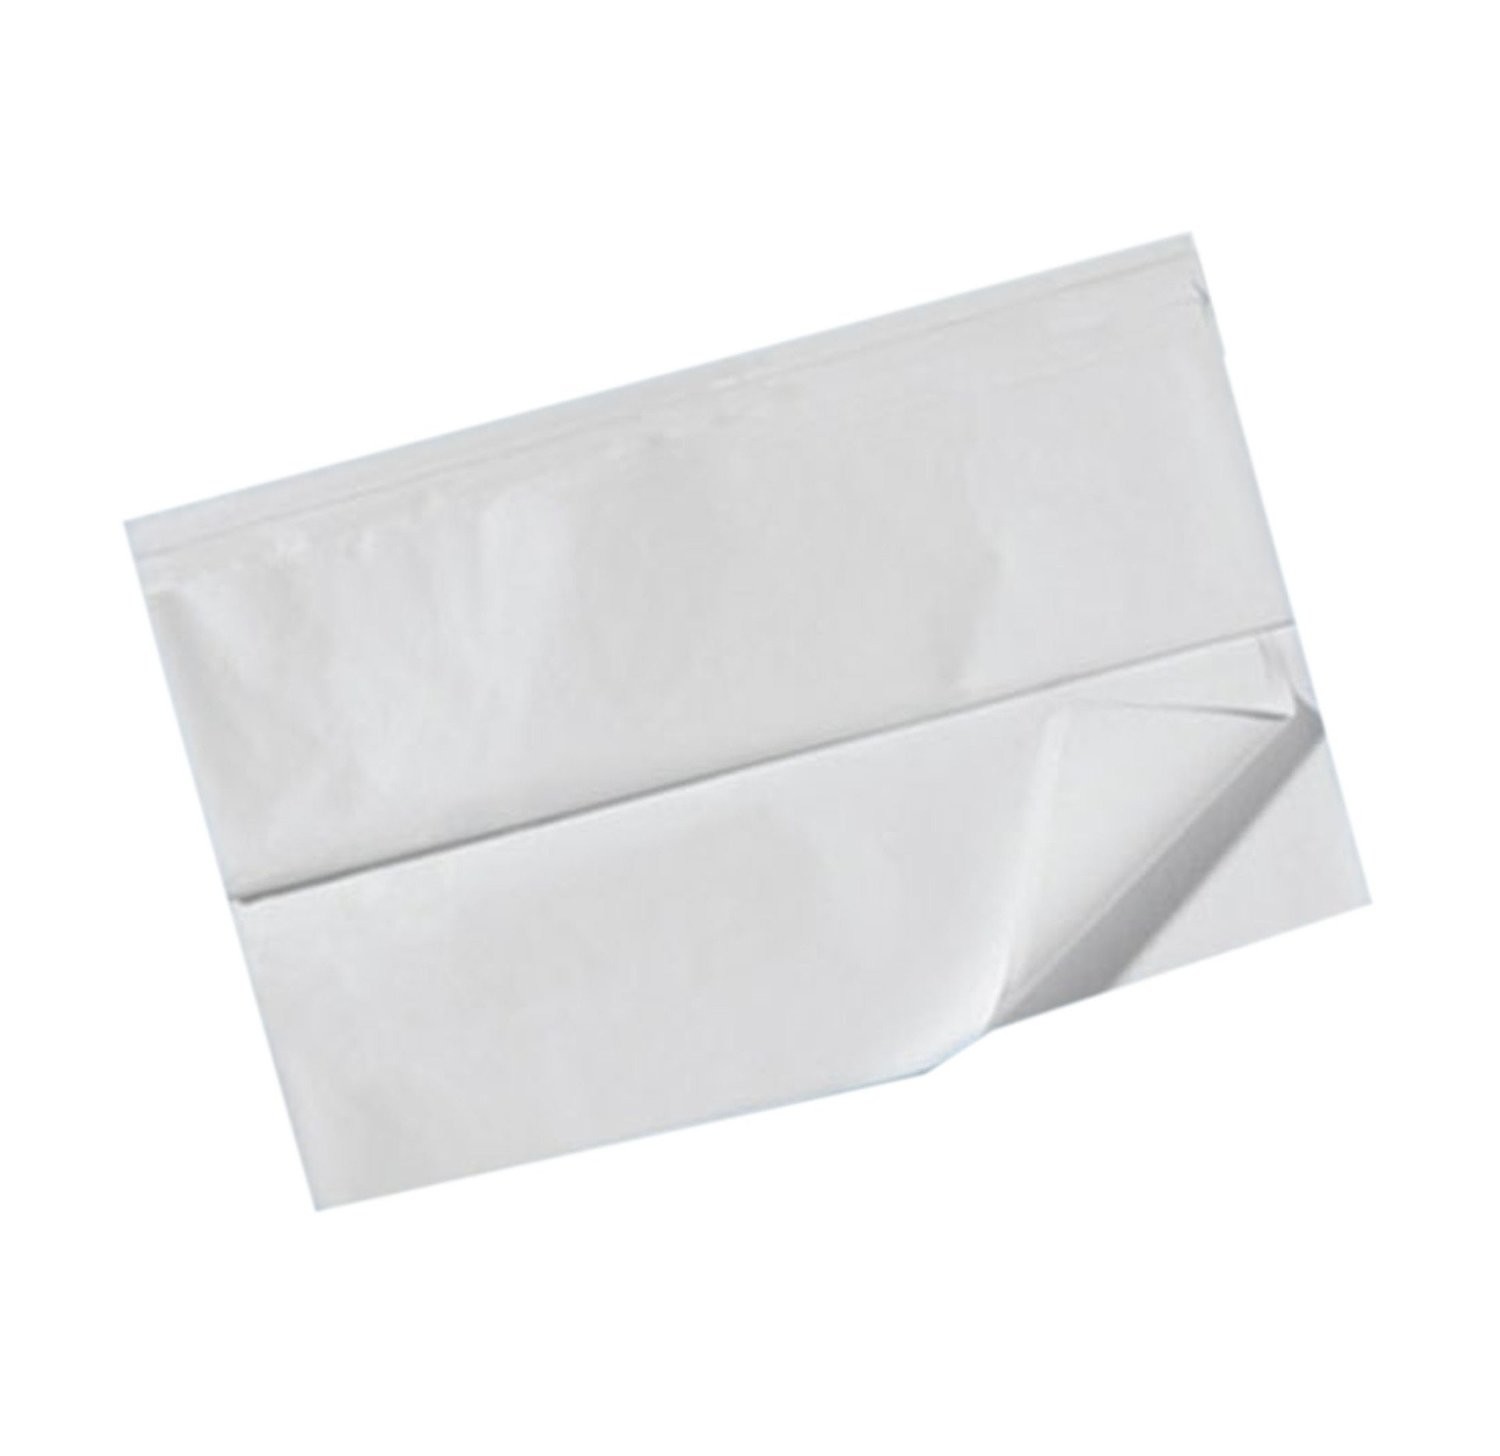 10,000 SHEETS OF WHITE ACID FREE TISSUE PAPER 375x500mm 